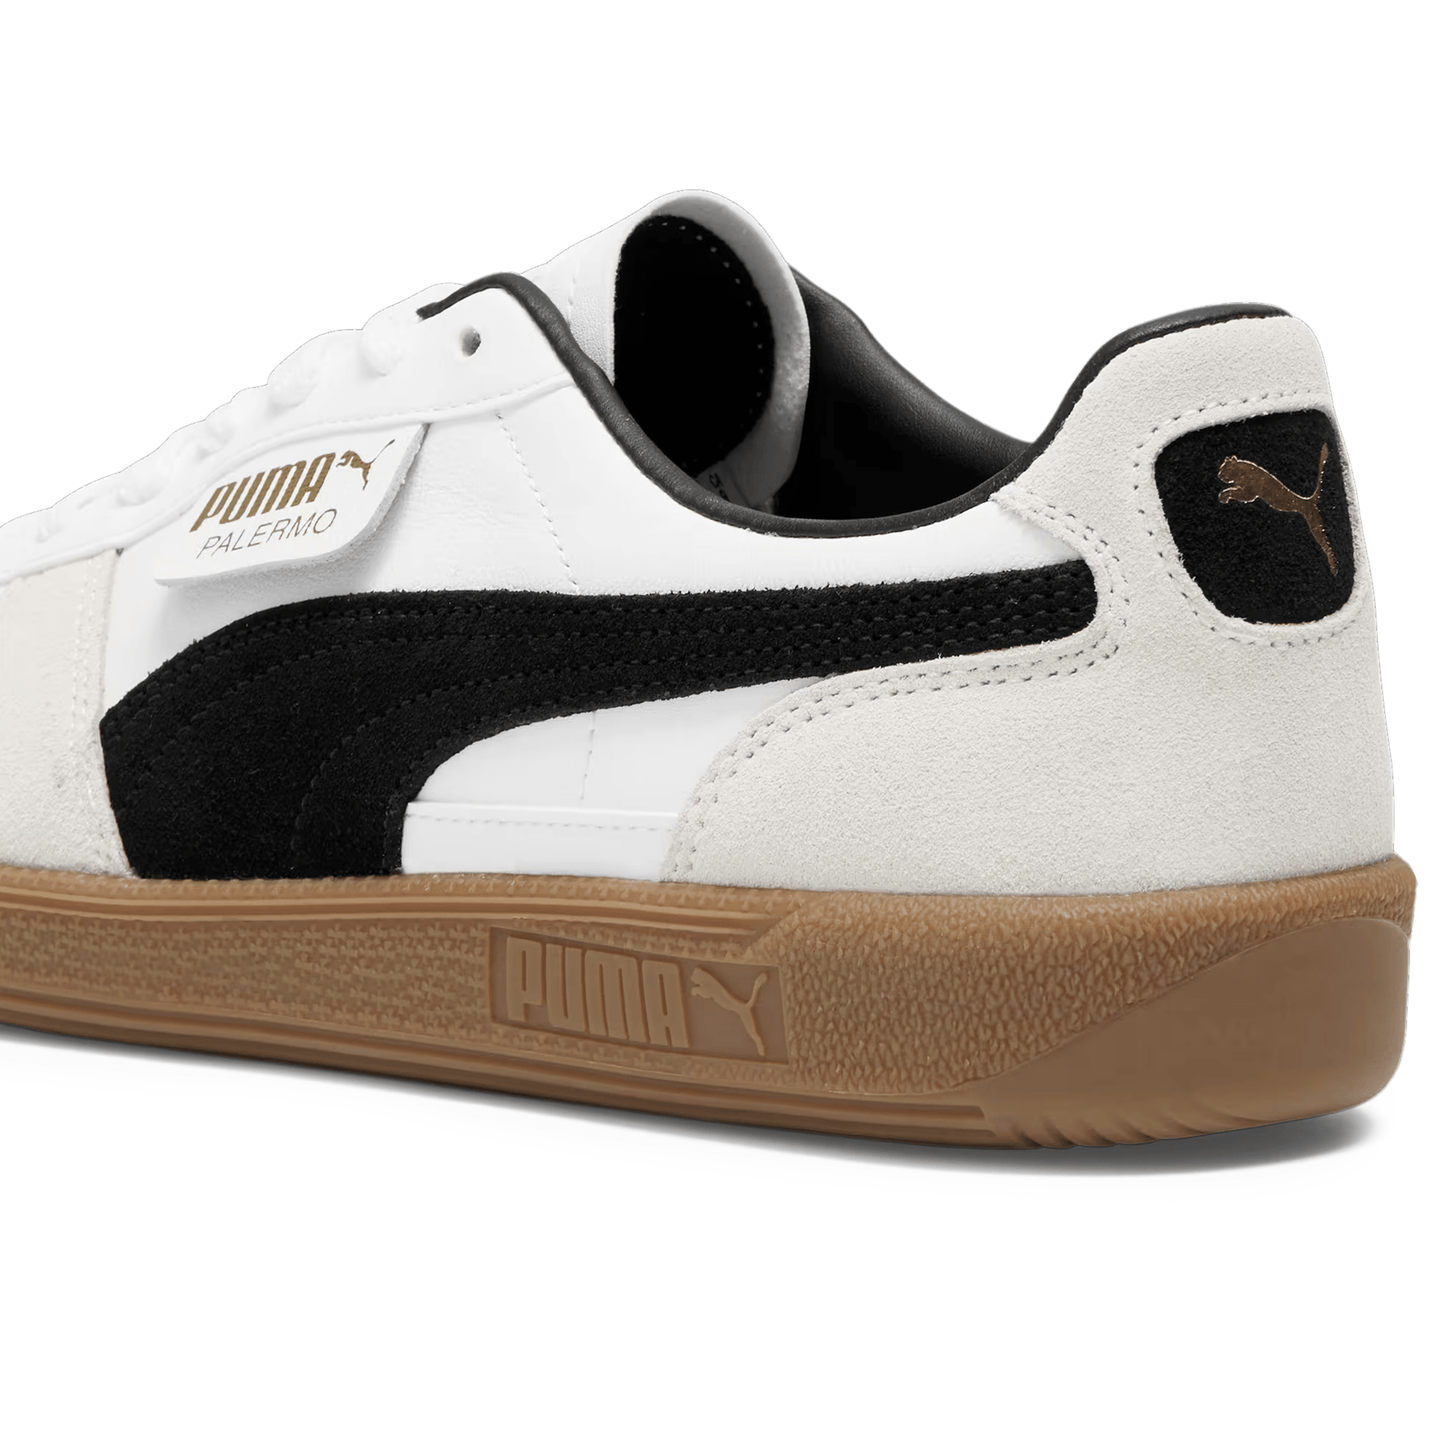 PUMA Sneakers WOMEN'S PALERMO LEATHER